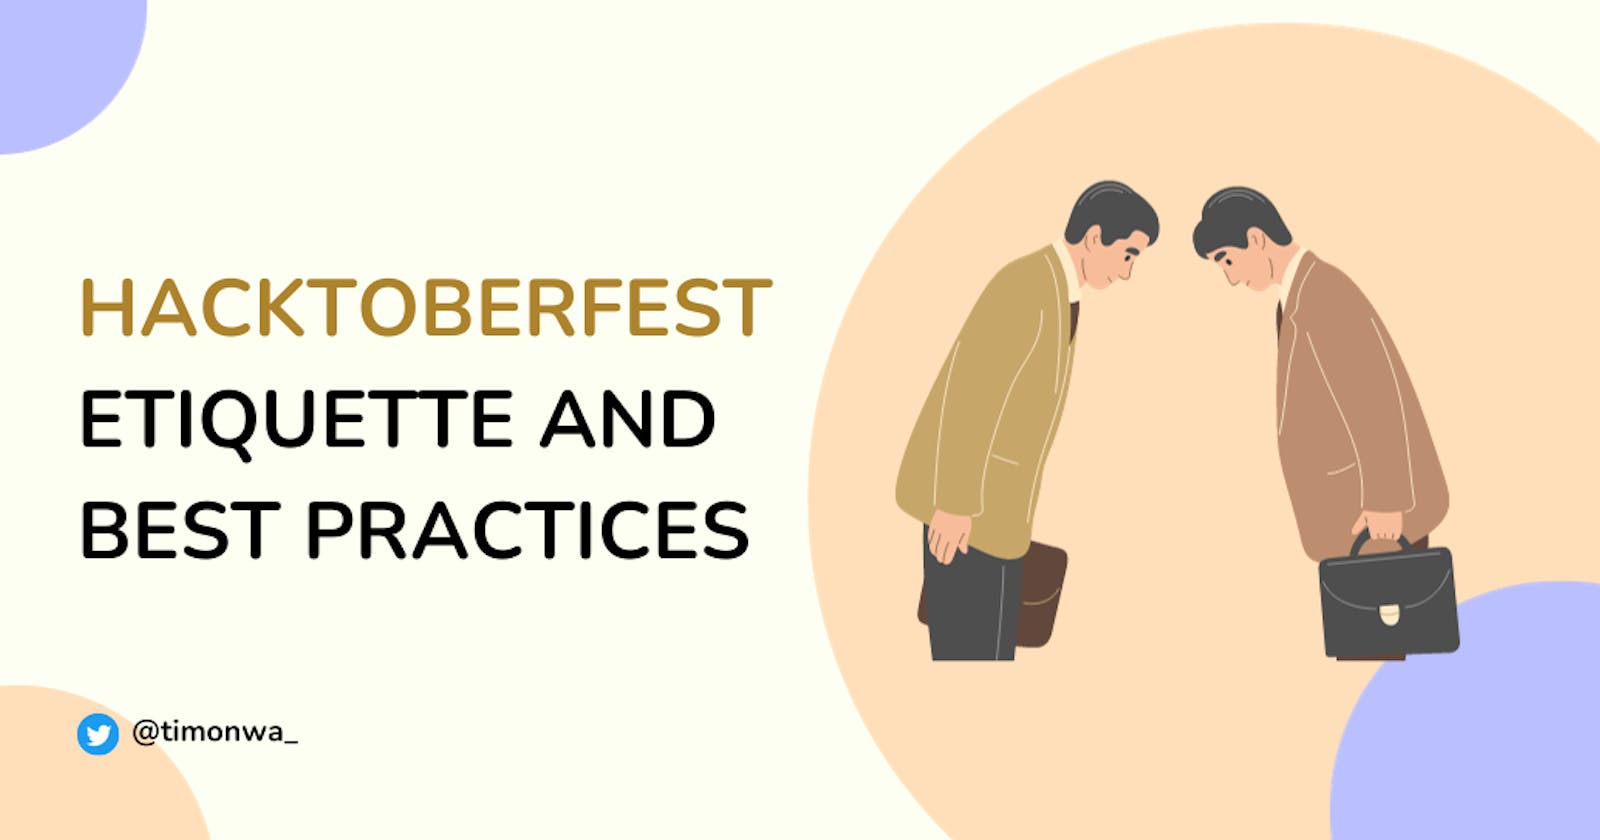 Hacktoberfest Etiquette and Best Practices: A Guide for First-time Contributors